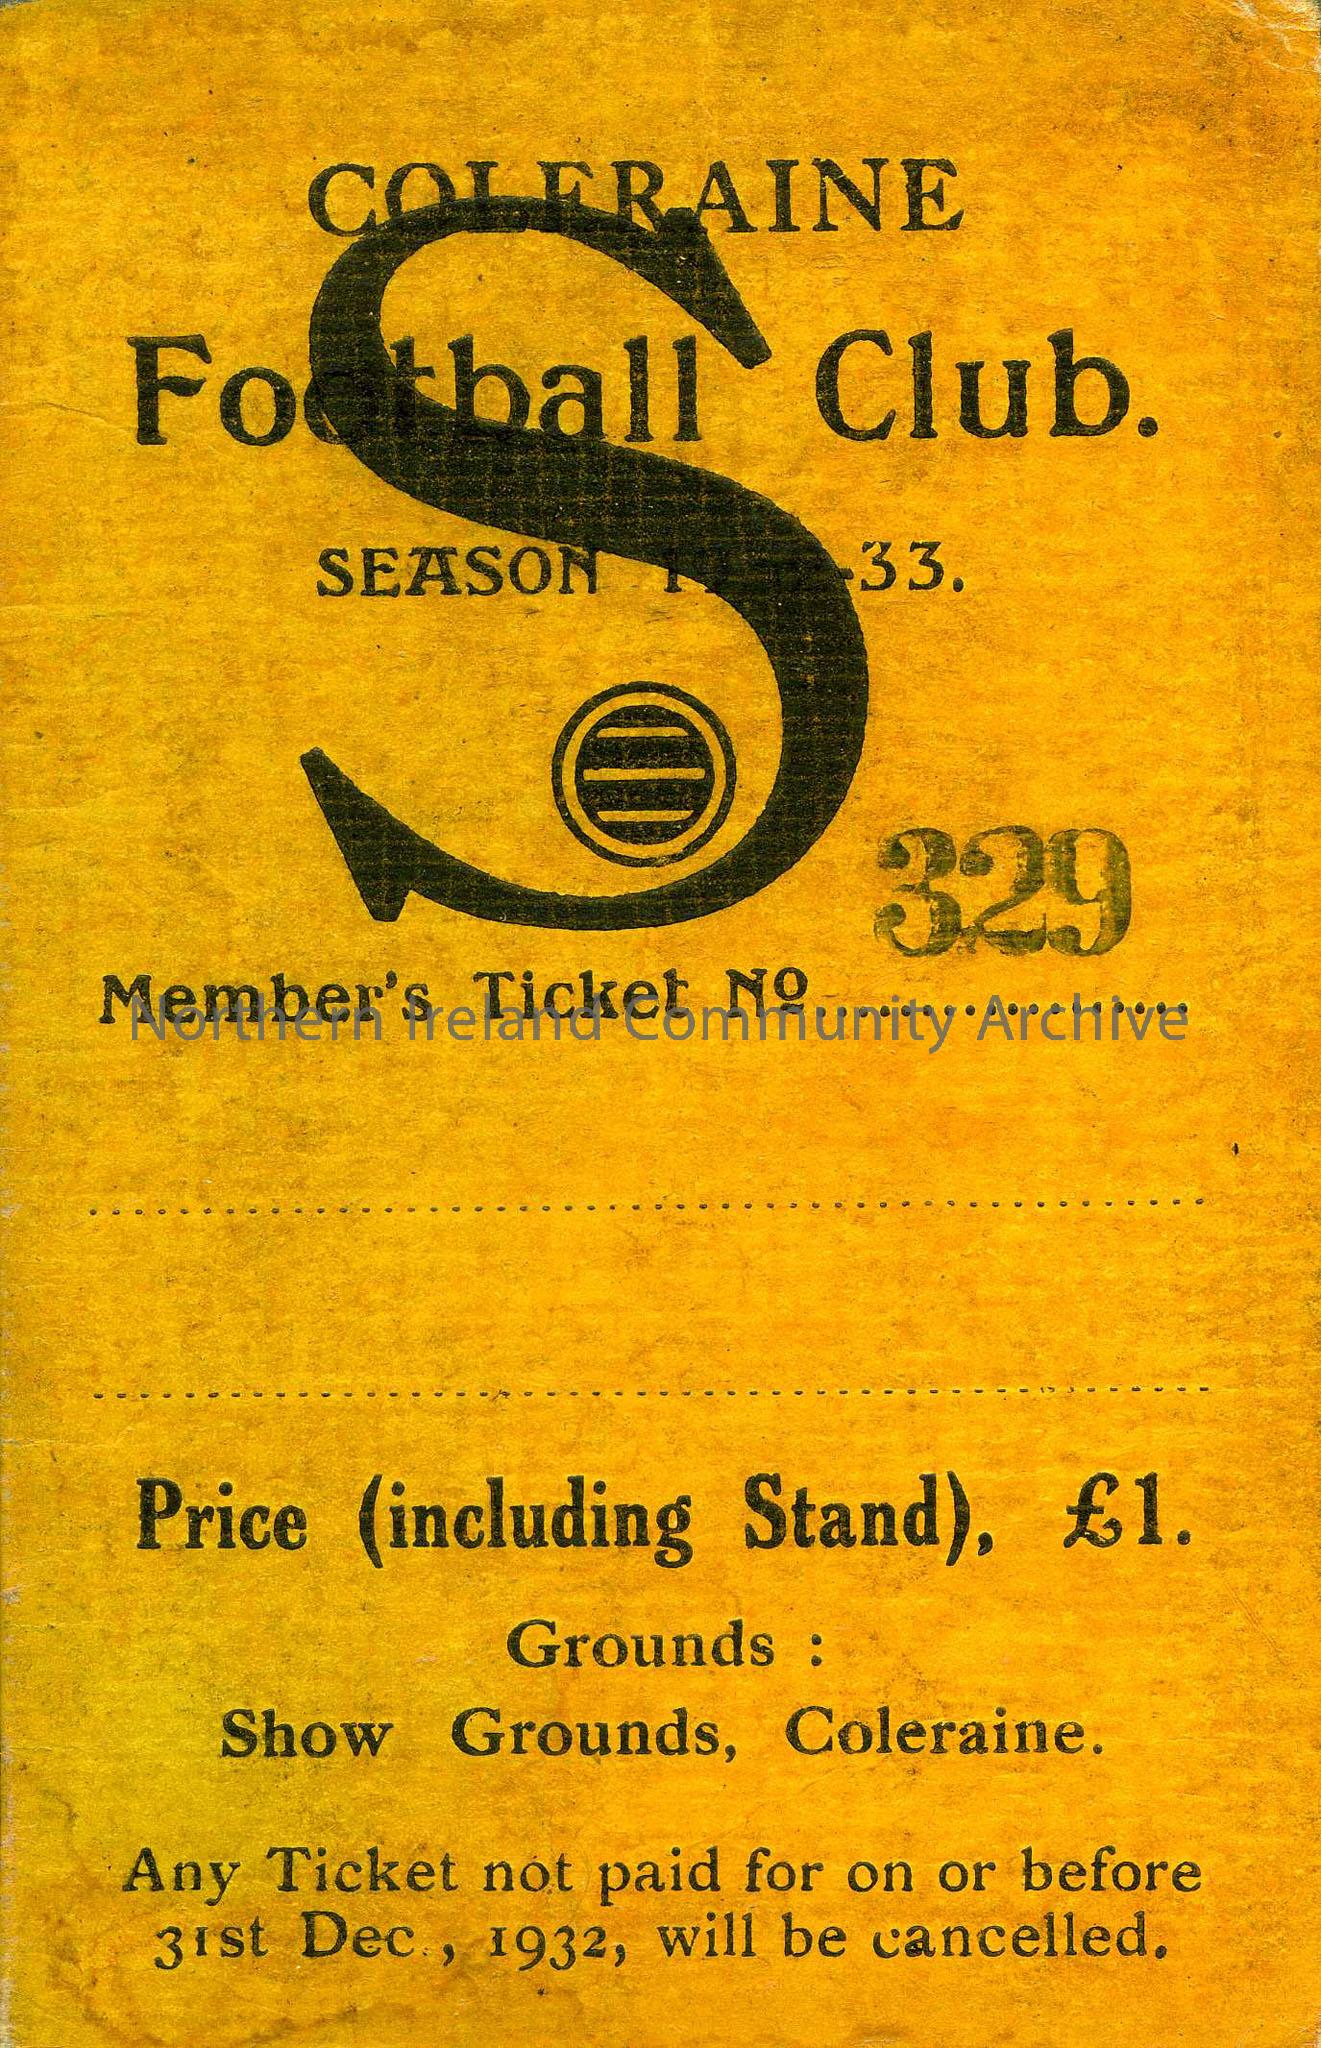 Season ticket for Coleraine Football Club 1932 – 1933. Fixtures listed inside and office bearers listed on the back.